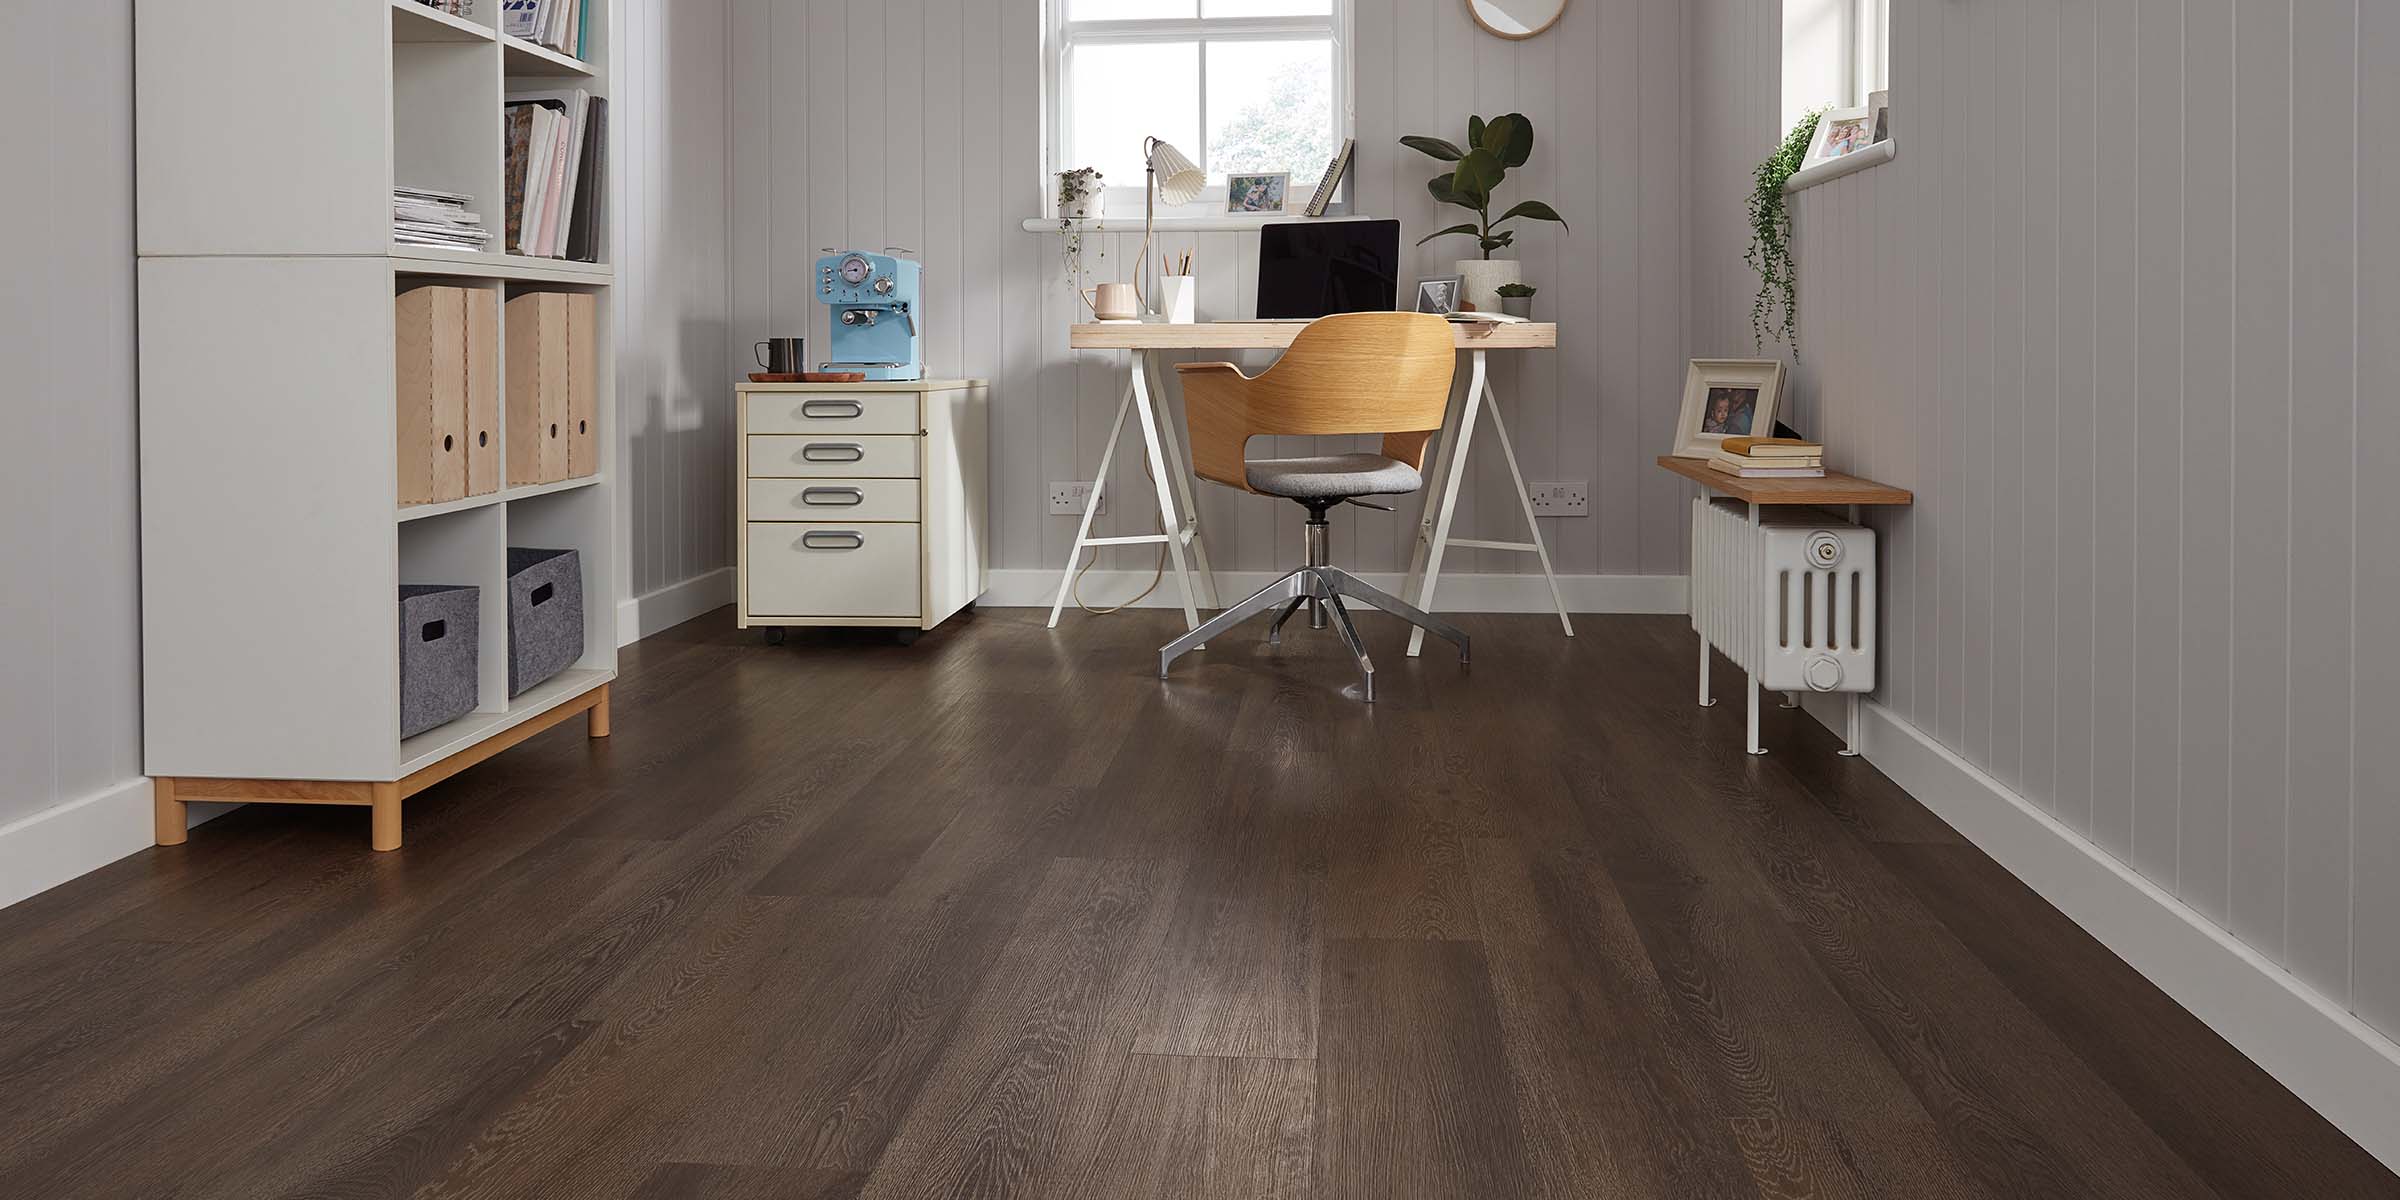 Palio Express flooring in a home office.jpg